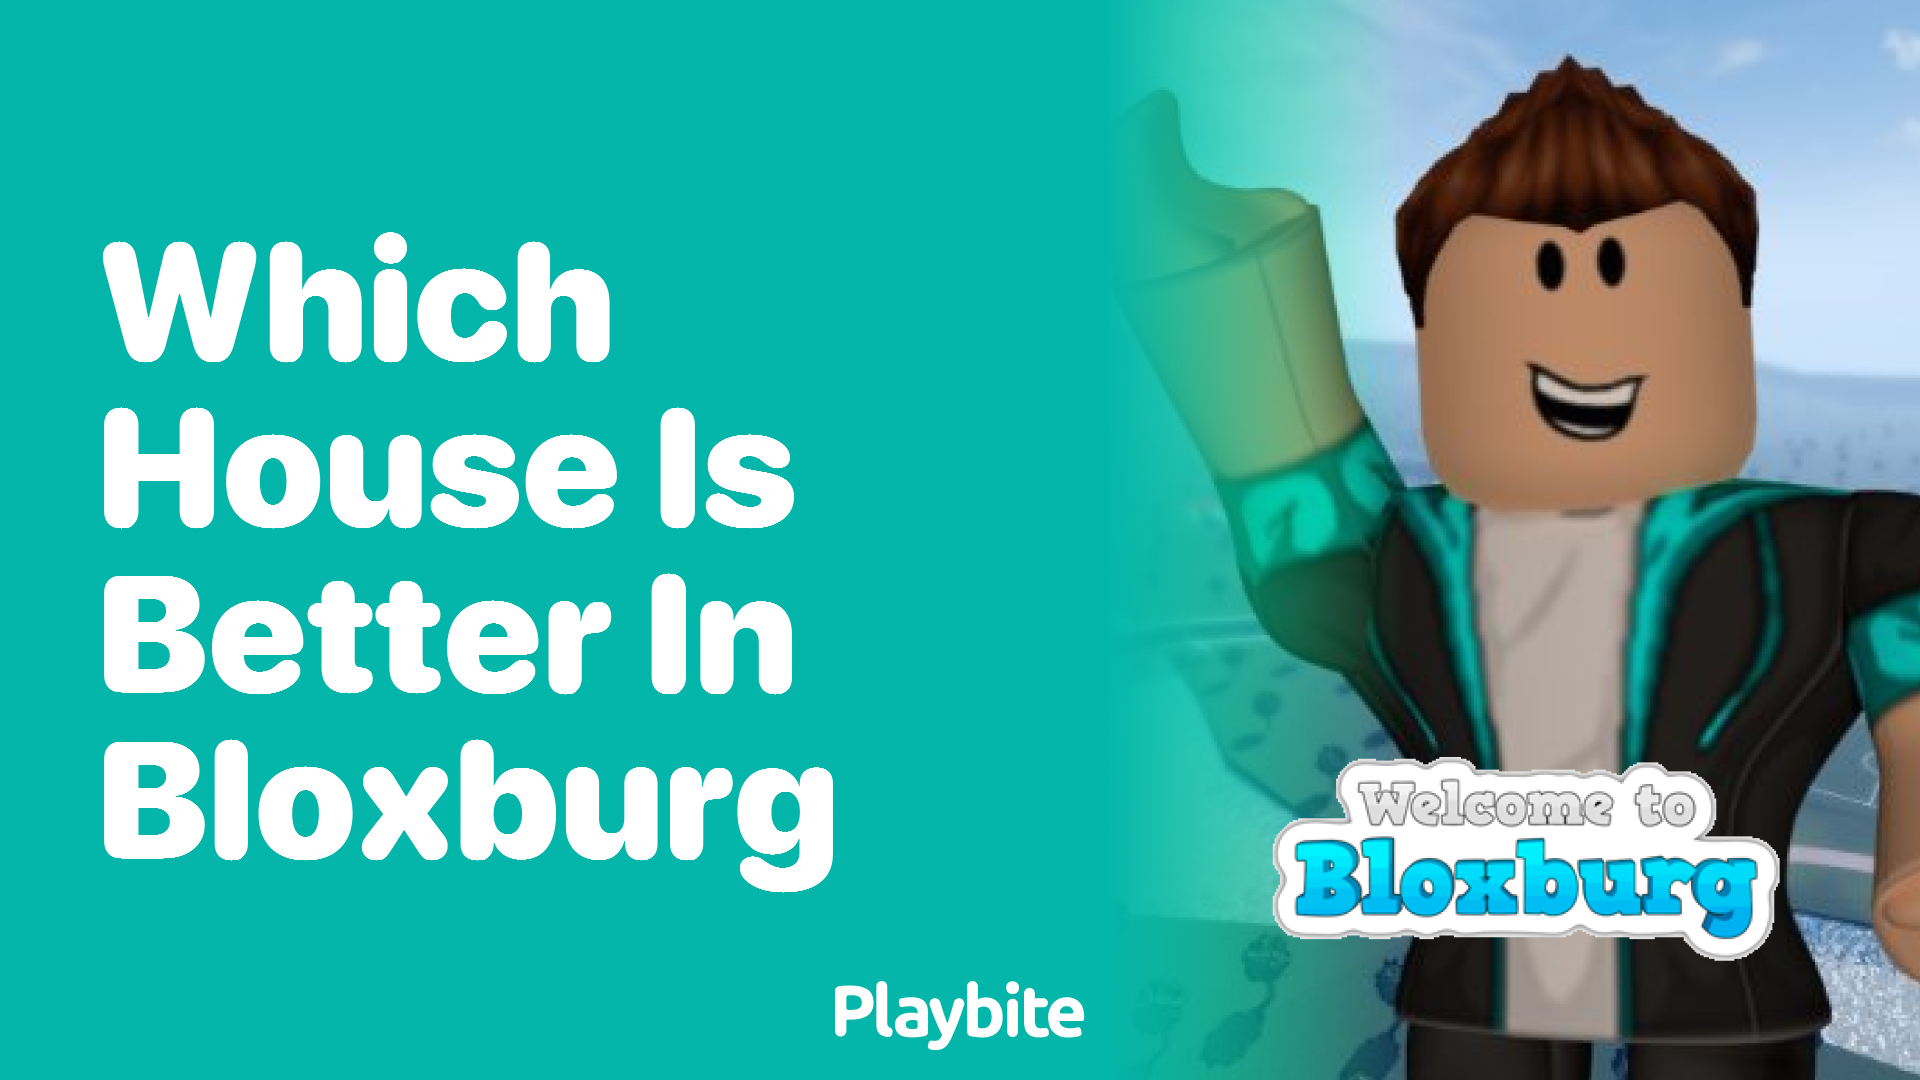 Which House is Better in Bloxburg?